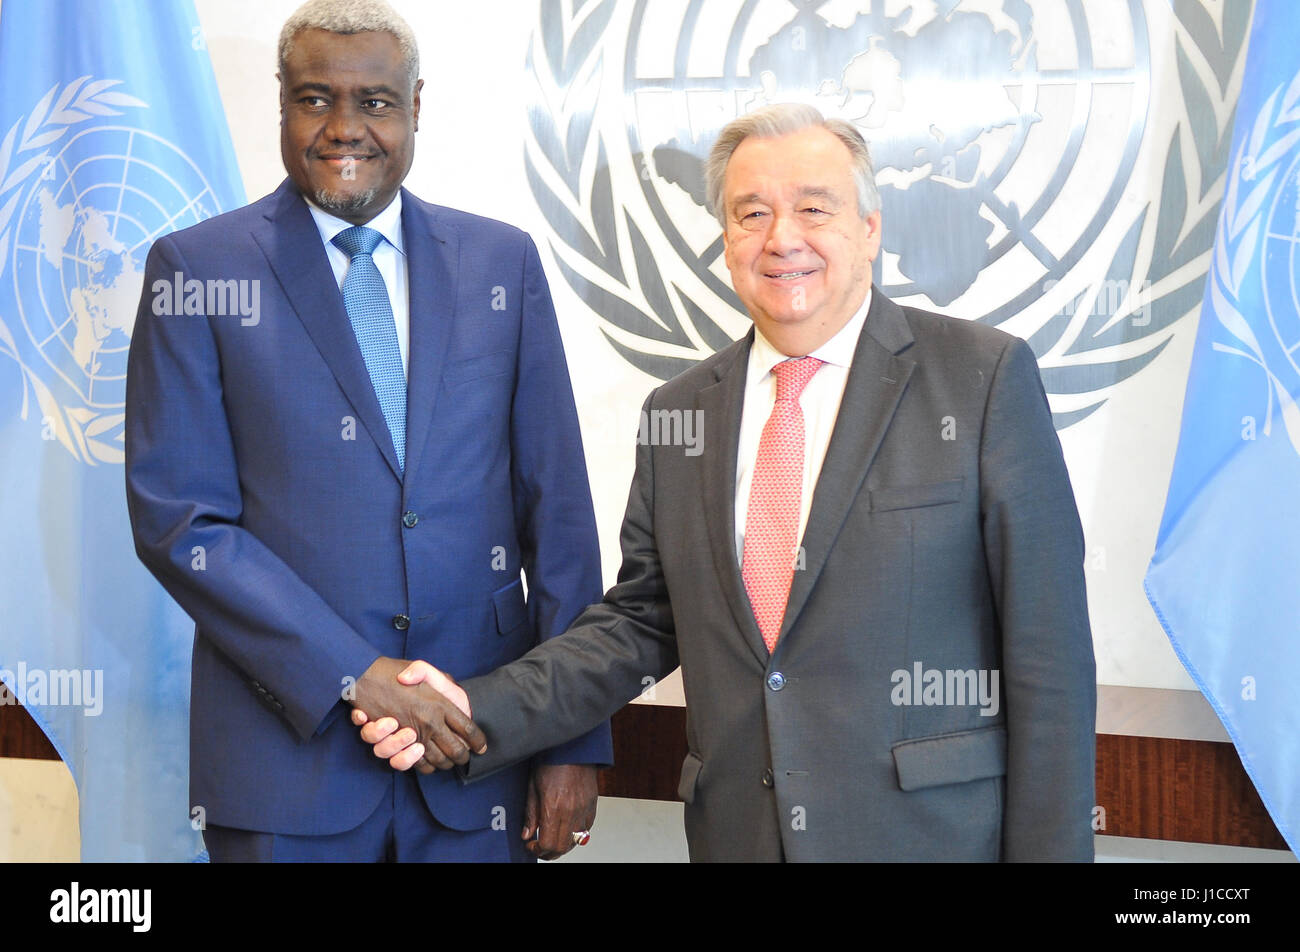 New York, United States. 19th Apr, 2017. UN Secretary-General Antonio Guterres meets with Moussa Faki Mahamat, the new Chairperson, African Union Commission (UA). The 28th AU Summit in Addis Ababa, capital of Ethiopia, January 31, 2017 chose Chadian Moussa Faki Mahamat as its new president for a four-year term. They convened today, April 19, the first UN-AU Annual Conference. Credit: Luiz Roberto Lima/Pacific Press/Alamy Live News Stock Photo